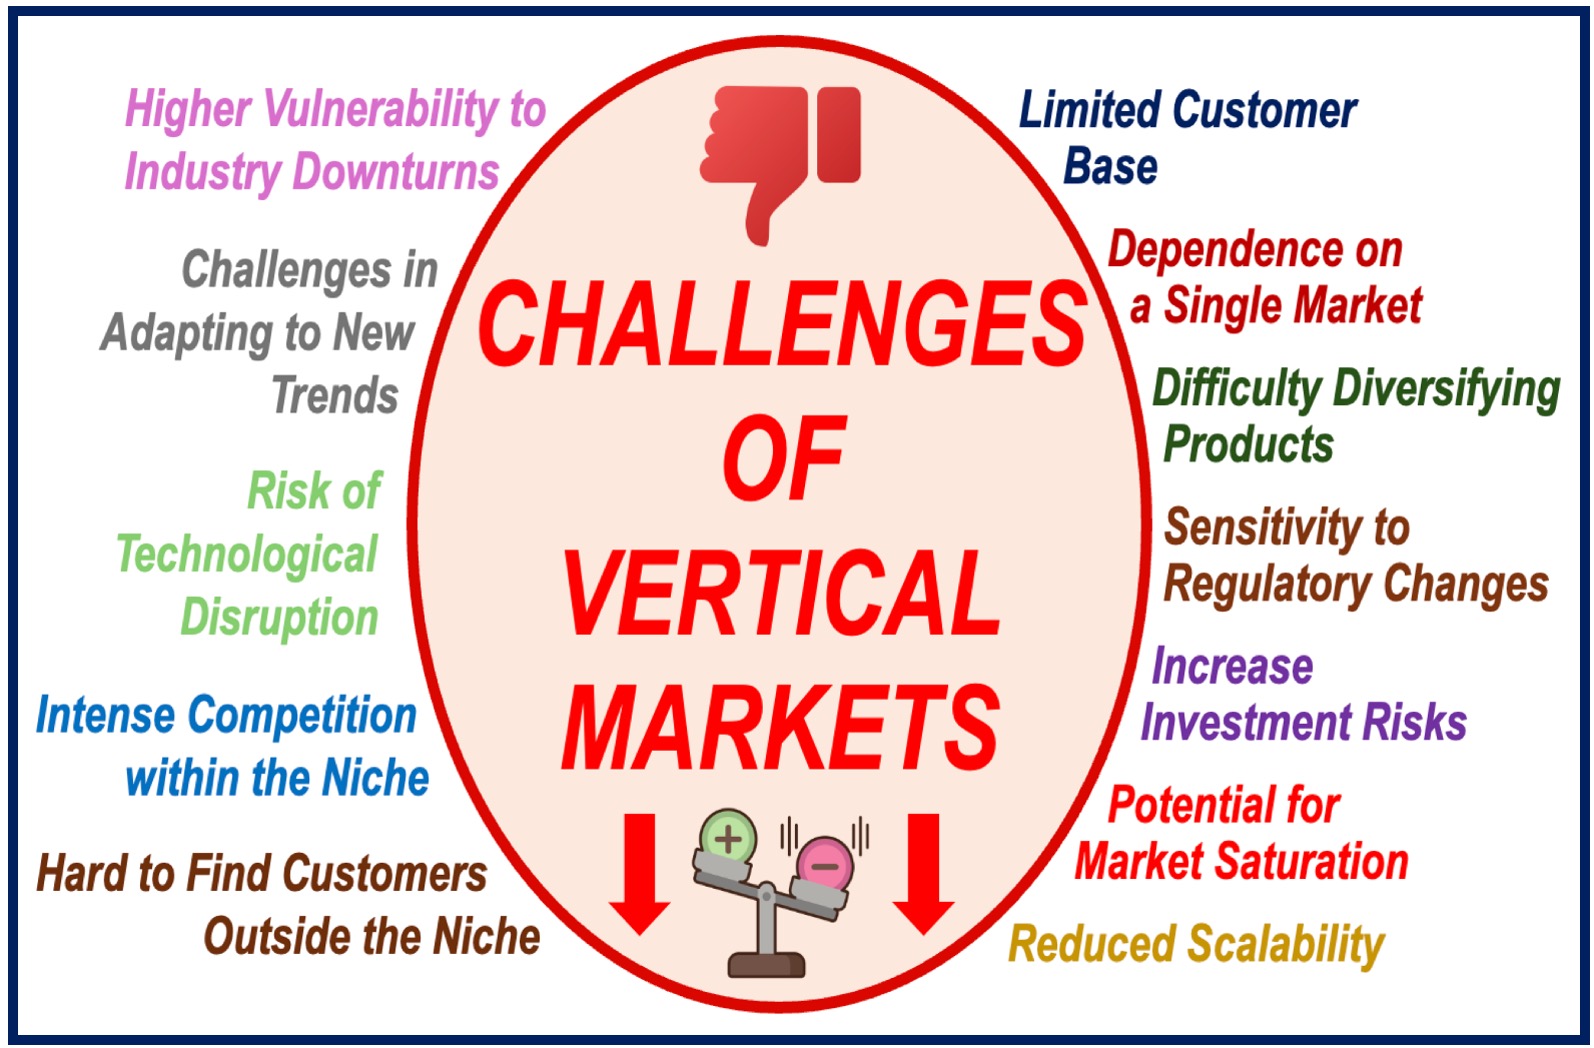 Oval shape surrounded by disadvantages of a VERTICAL MARKET.